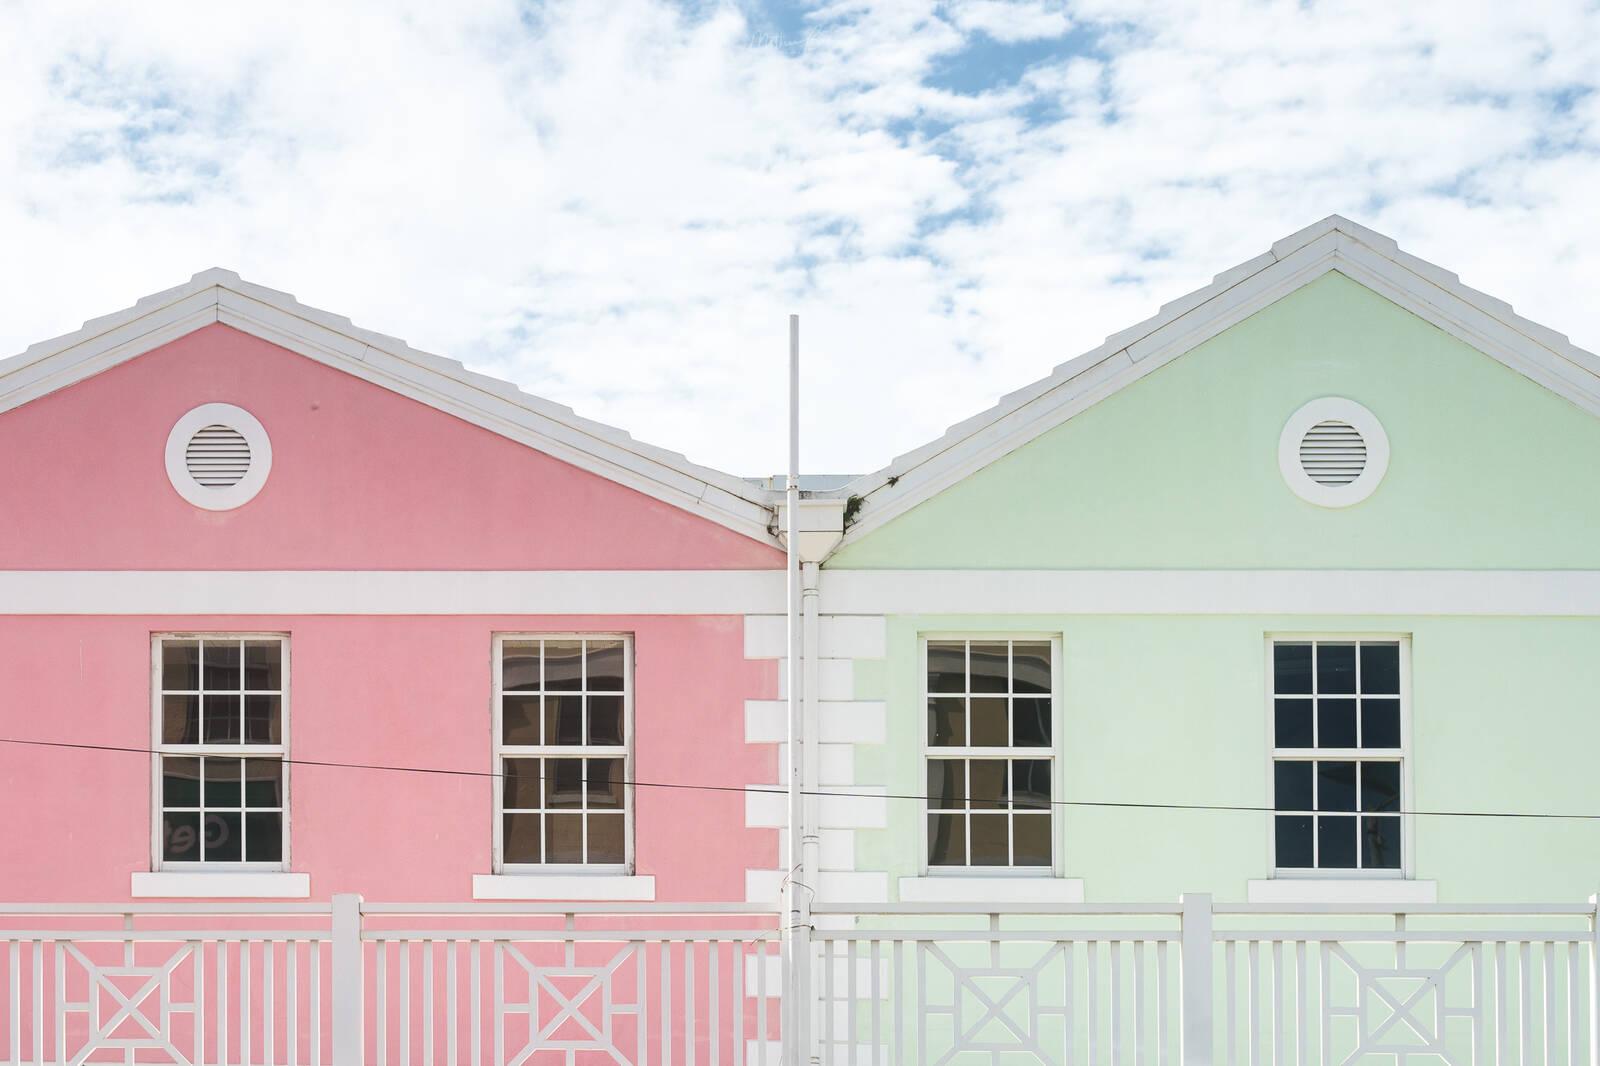 Image of Painted Houses of Downtown Nassau by Mathew Browne